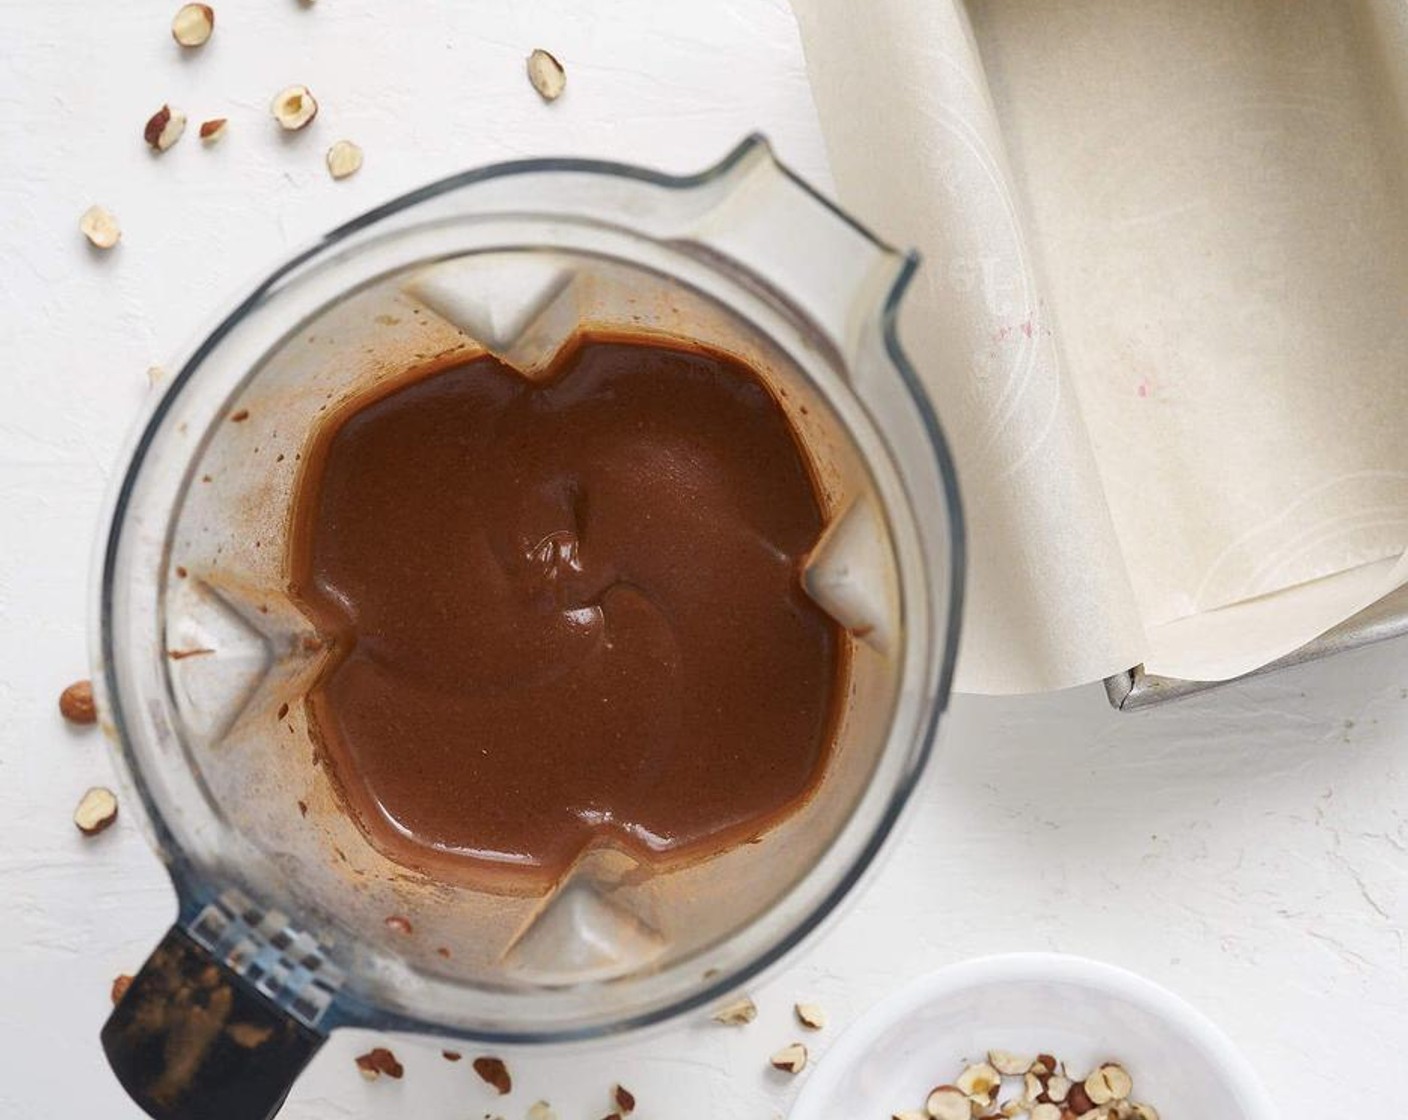 step 1 Place Hazelnut Butter (1/4 cup), Raw Cacao Powder (1/4 cup), Maple Syrup (1/4 cup), Cashew Nuts (1 cup), Maca Powder (1 Tbsp) and Full-Fat Coconut Milk (1/2 can) into a high powder blender and give a whirl until smooth and creamy.